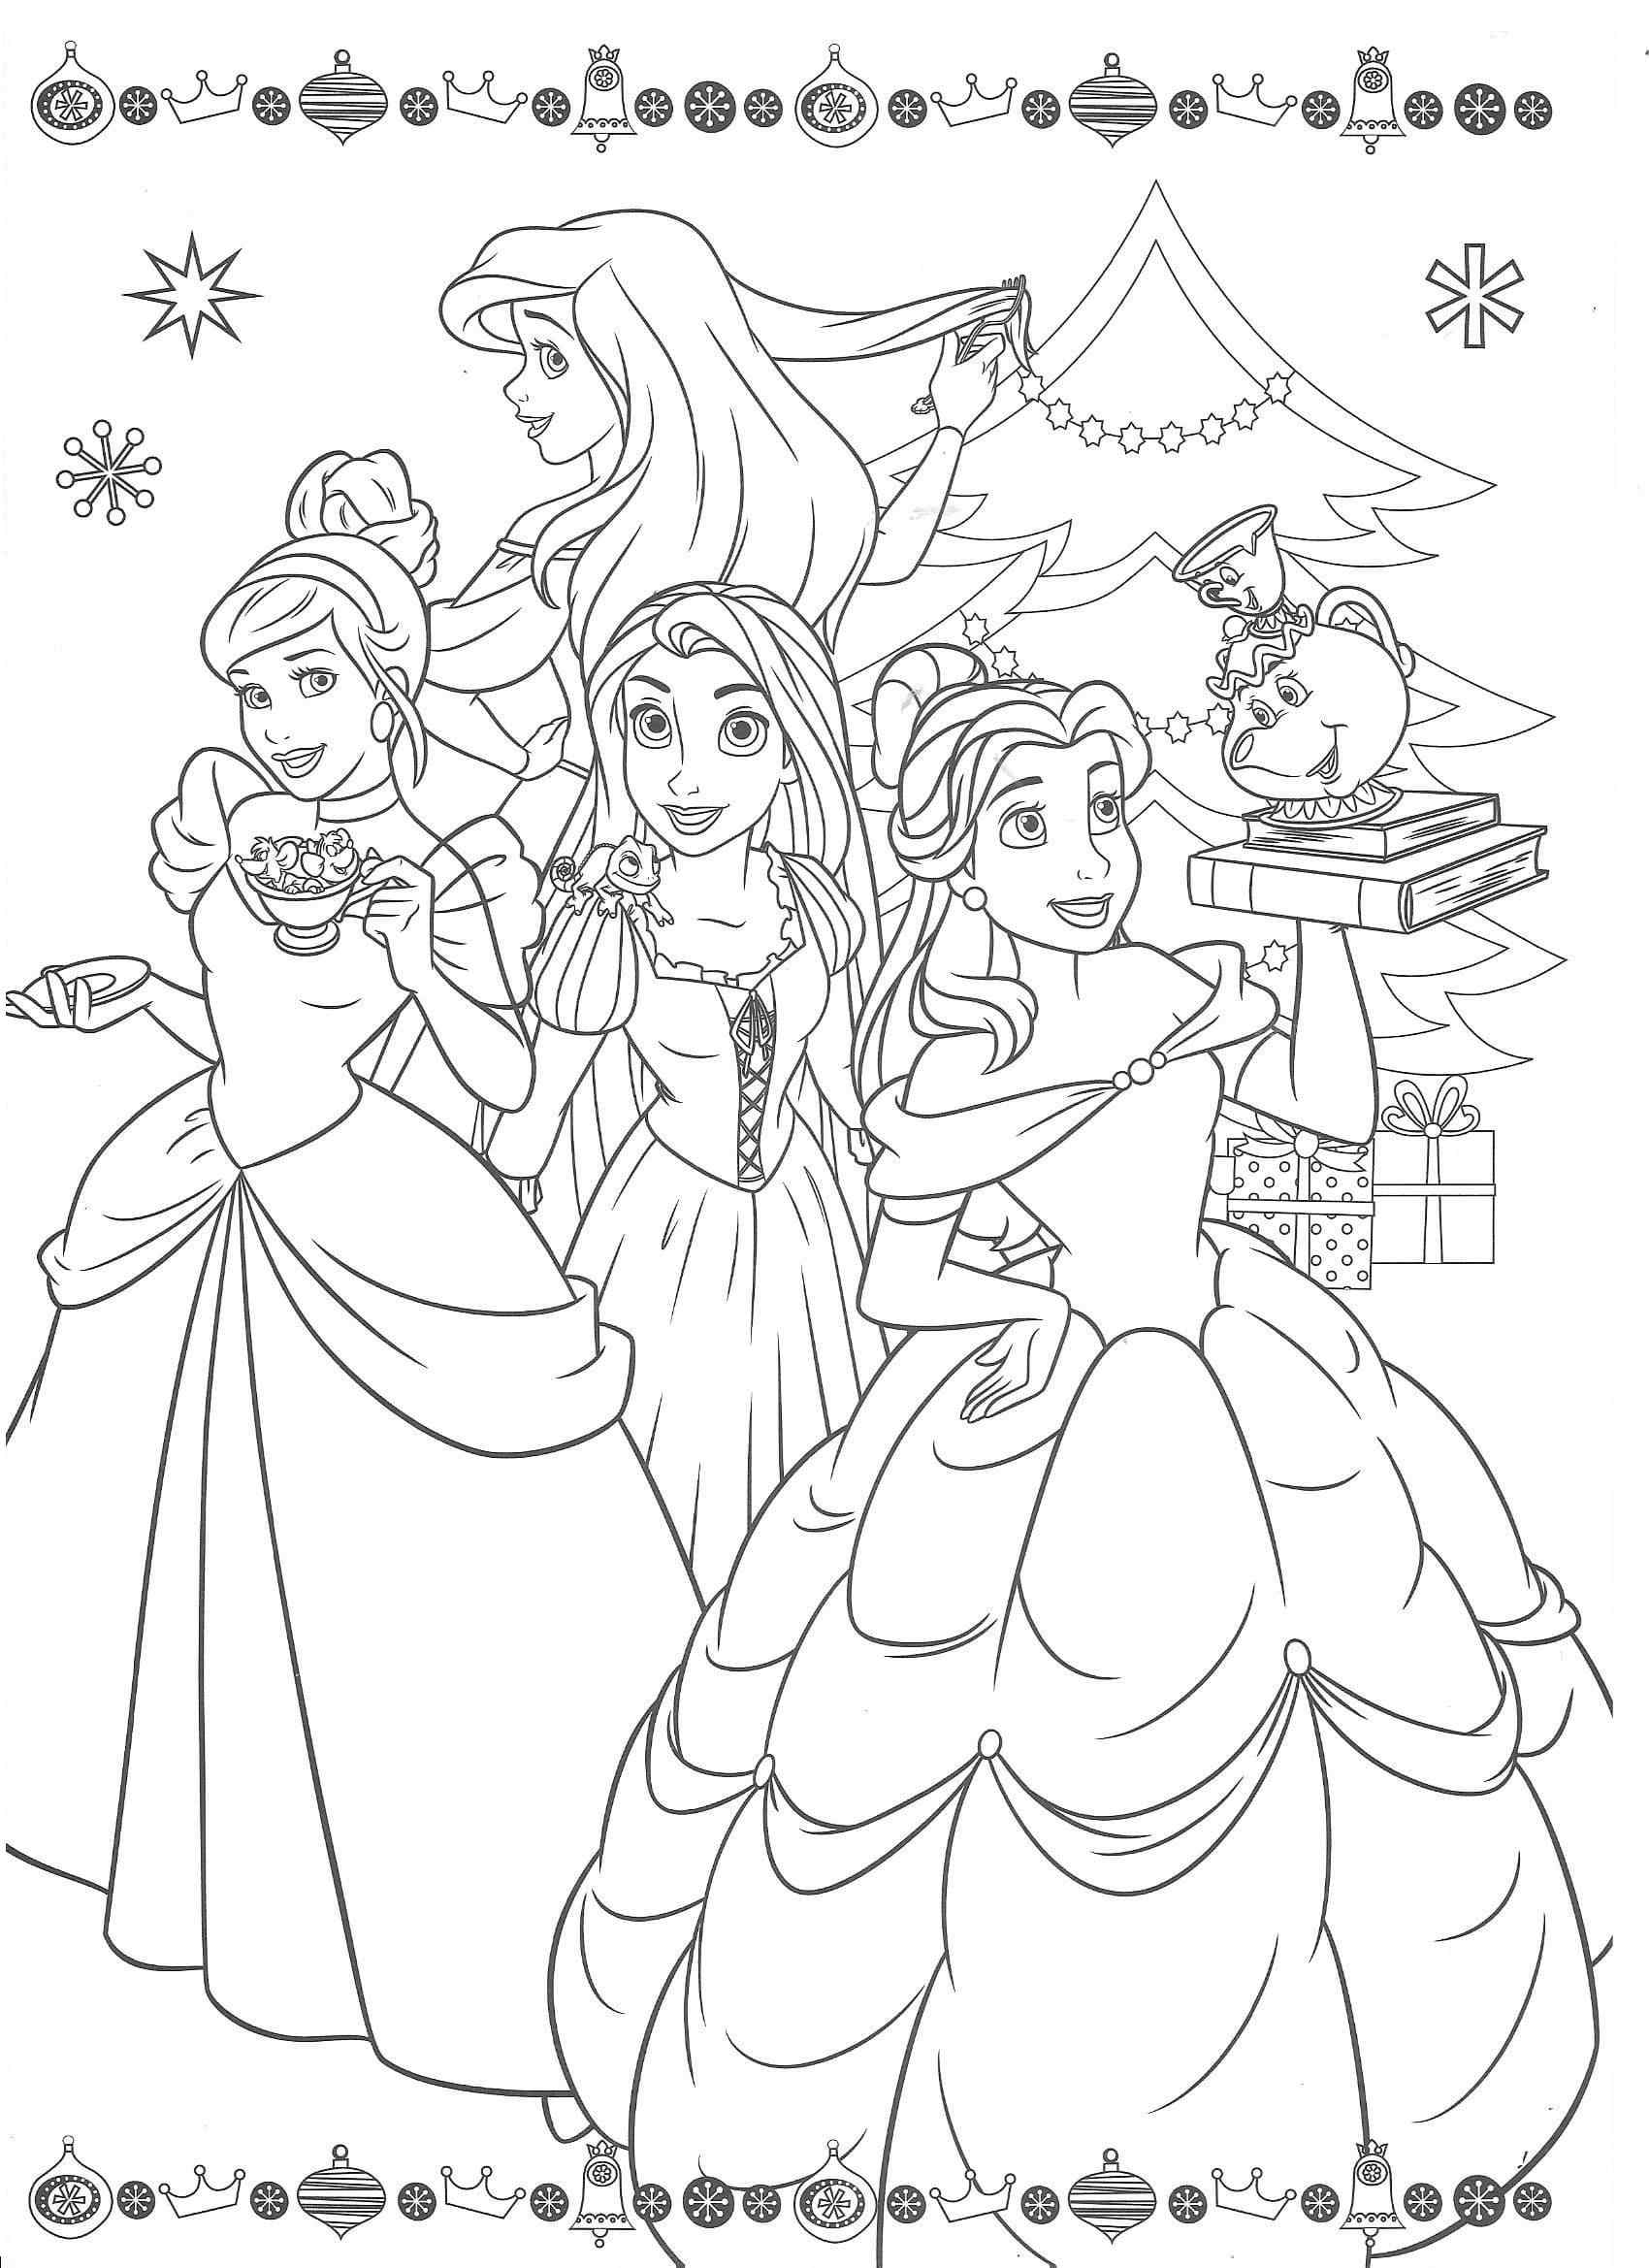 The Celebration Begins Coloring Page